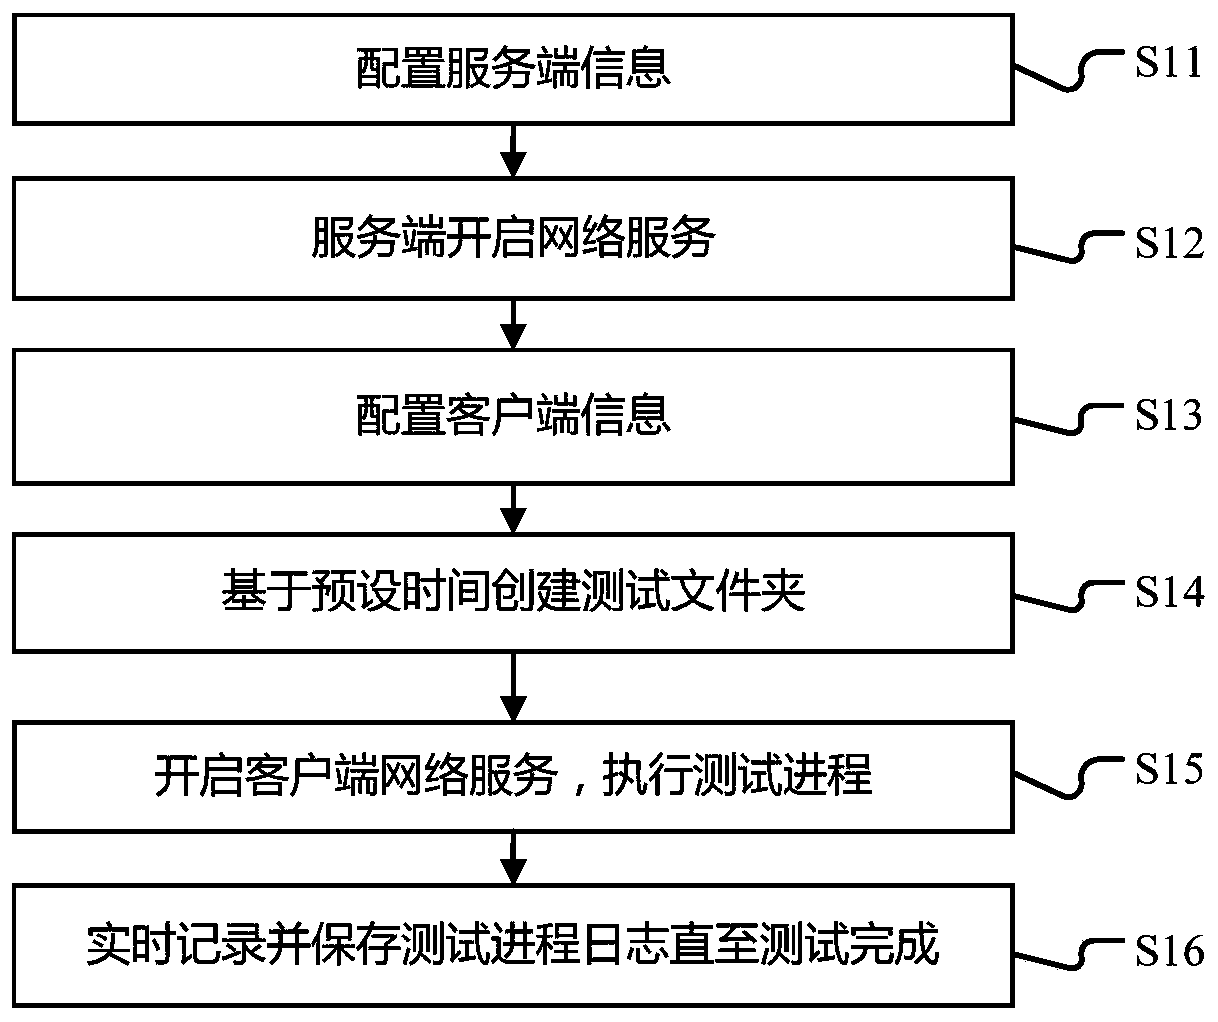 Automatic optimization and network pressure test method and system